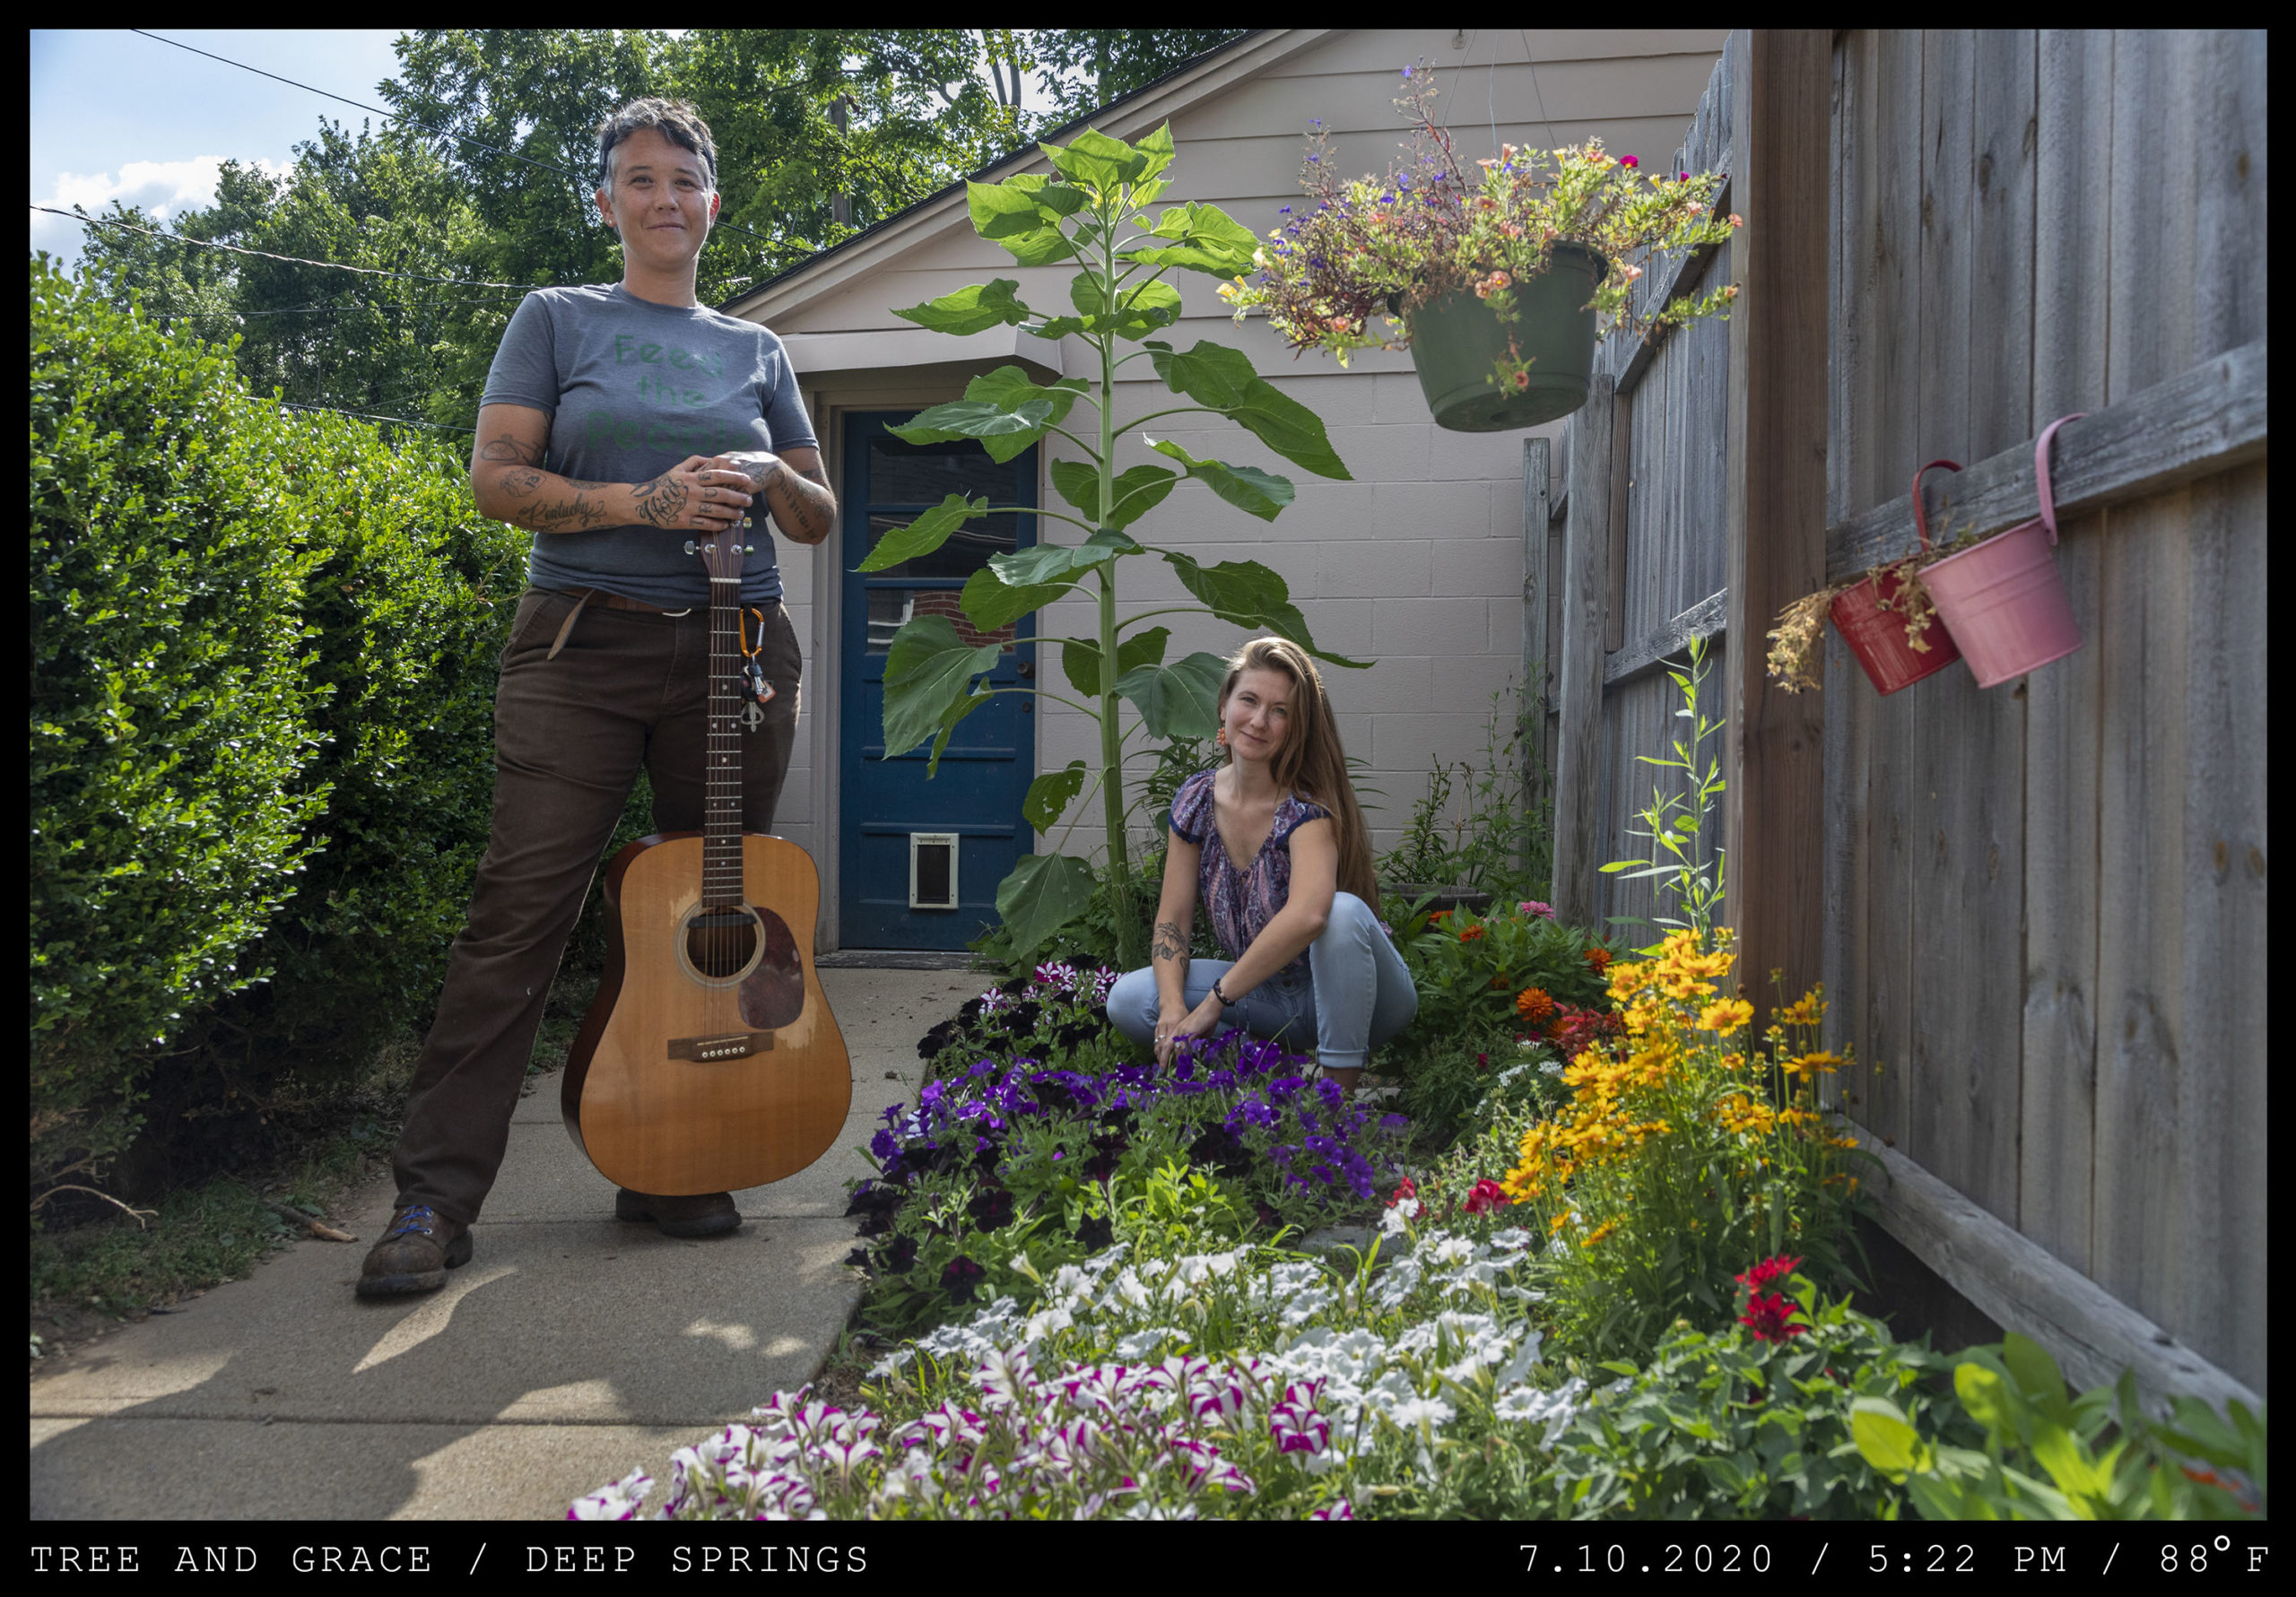 A tattooed young woman with short hair stands in a garden holding an acoustic guitar while a young woman with long brown hair crouches among purple flowers.